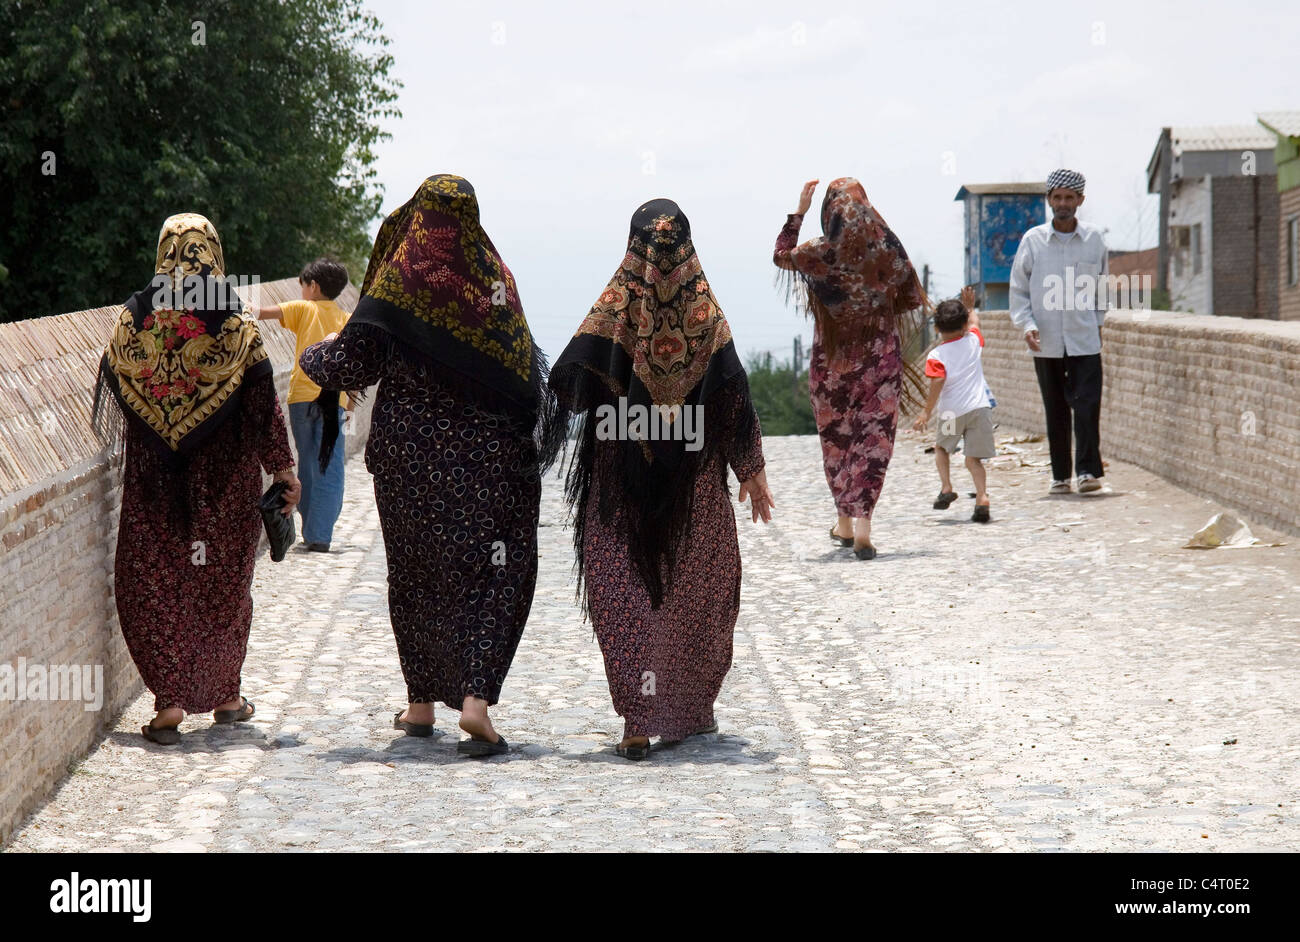 Iranian women, children and man walking on a bridge (Pol-e Safavi) in Aq Qal'eh (or Aq Qala), Iran. Daily life in the Middle East Stock Photo